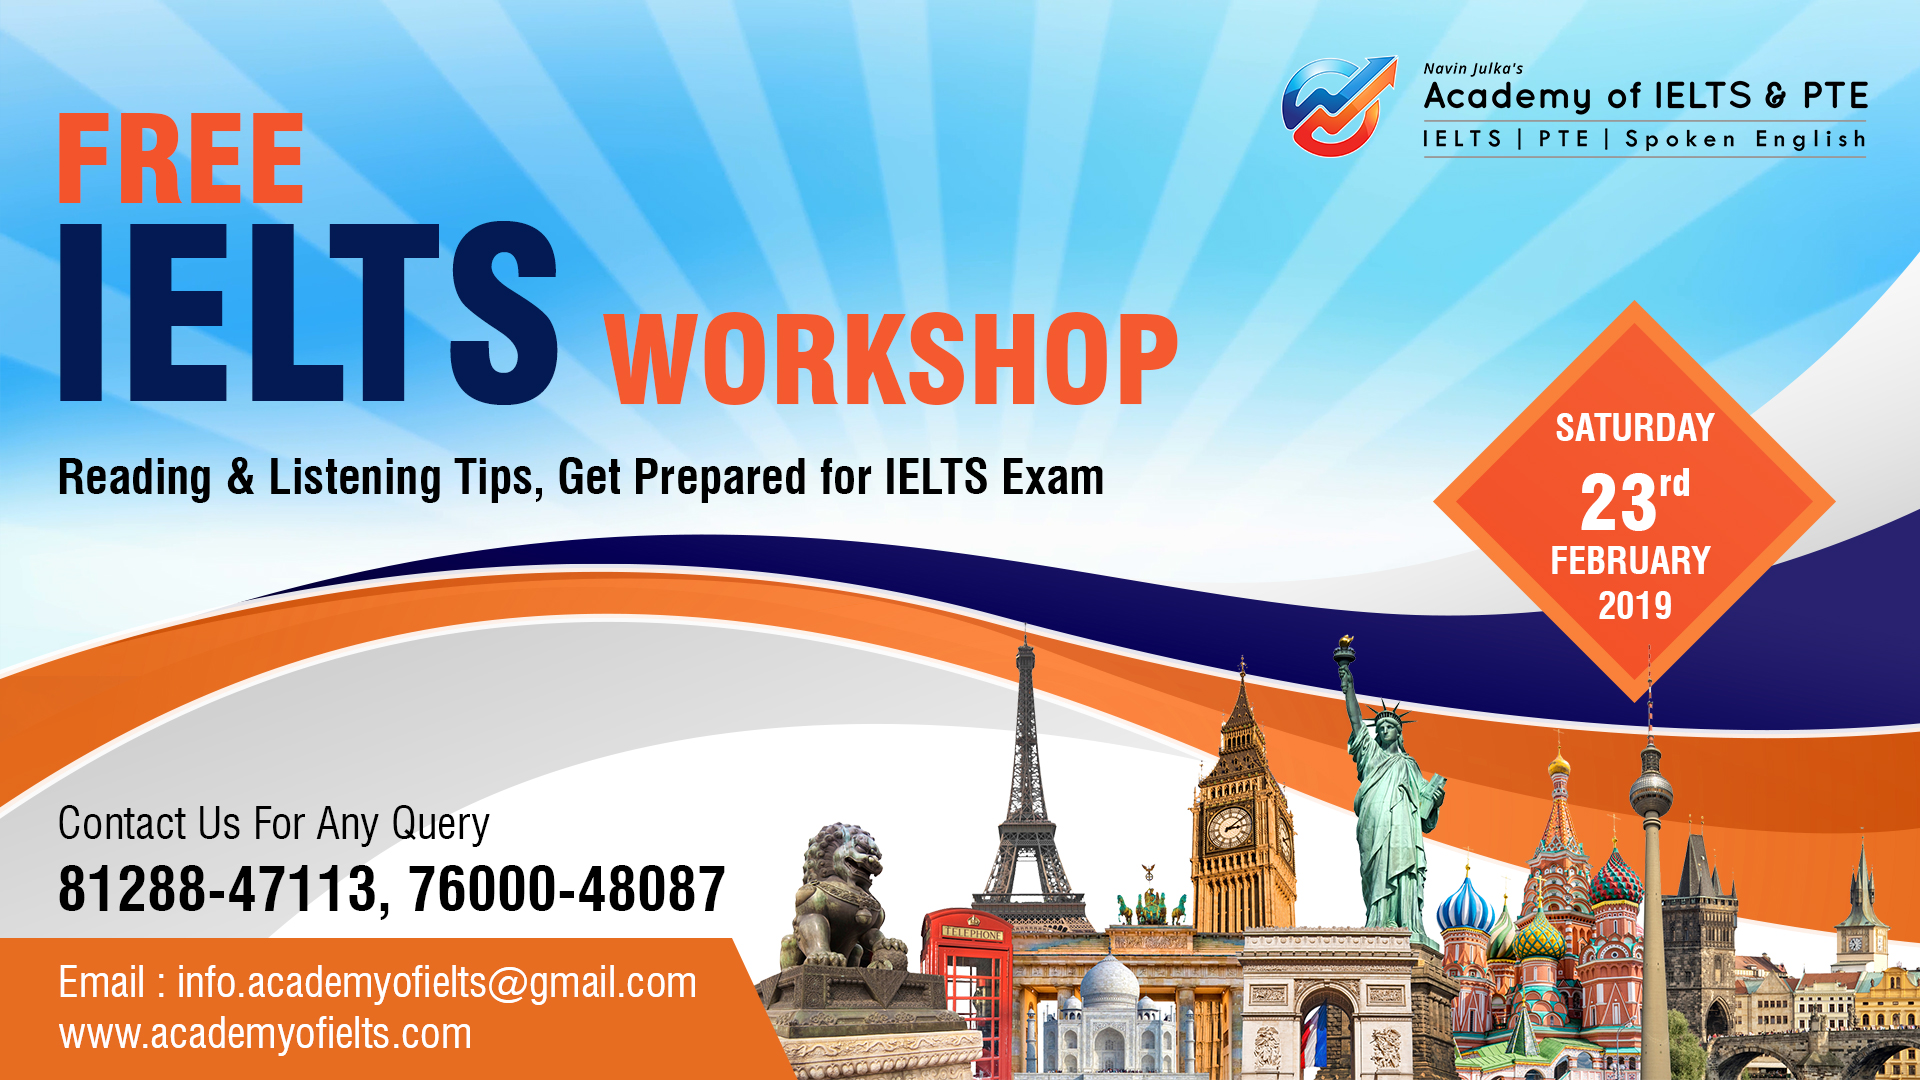 FREE IELTS WORKSHOP ON READING AND LISTENING TIPS